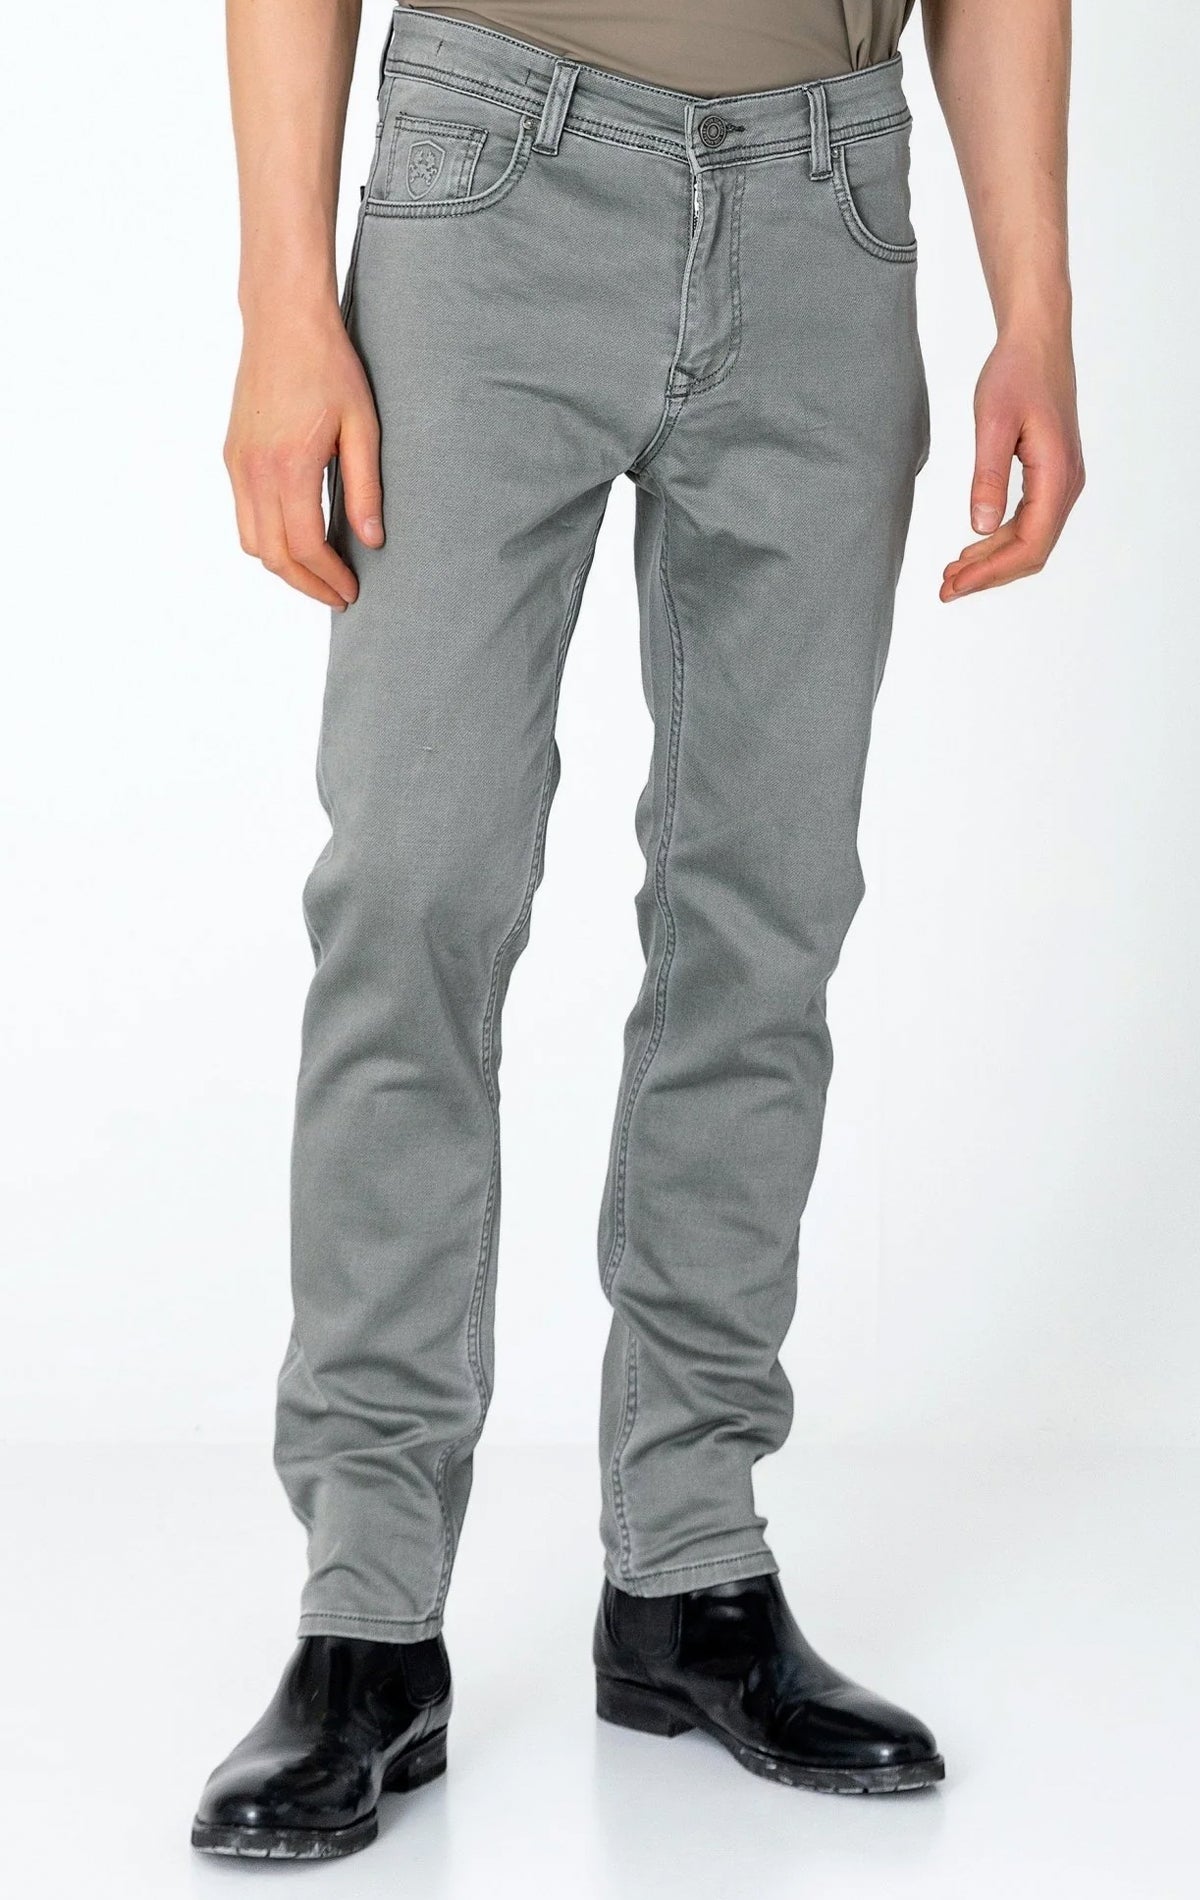 Men's super soft 5-pocket style pants in grey color. The pants are made from a 98% cotton, 2% elastane blend and feature a tailored fit with a hint of stretch, classic 5-pocket styling (two front pockets, two back pockets, and a coin pocket).